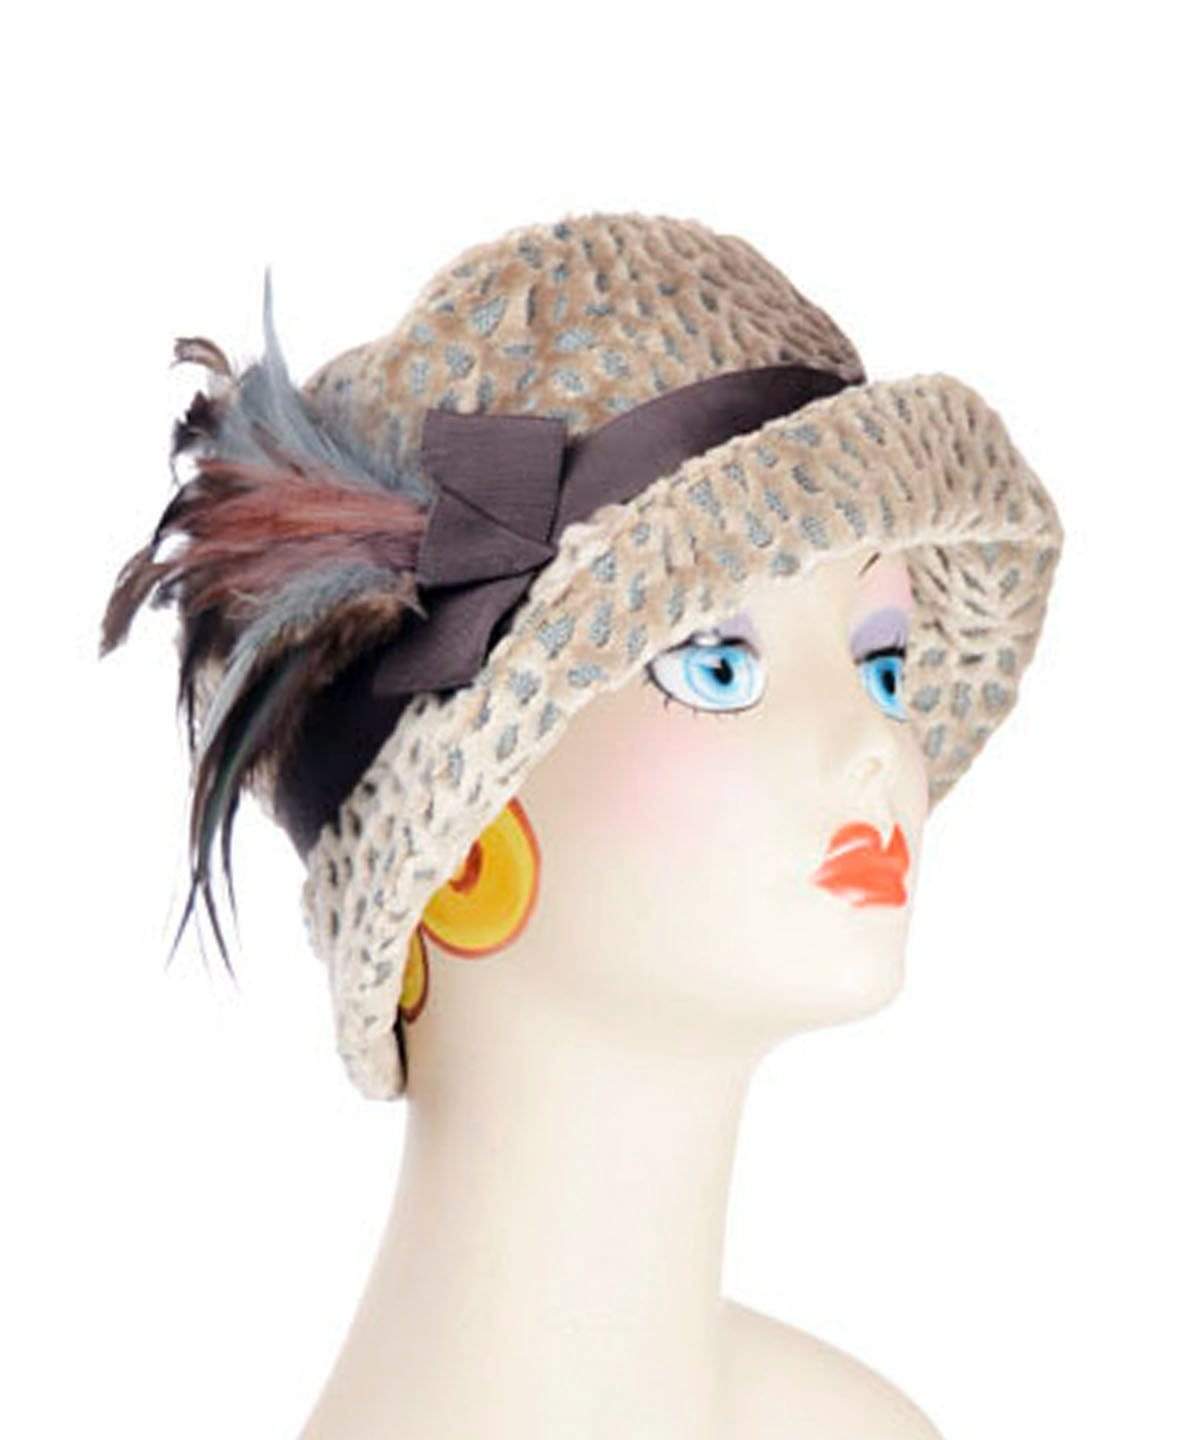 Grace Cloche Hat in Rossini Upholstery Fabric with Chocolate Grosgrain featuring a Mauve and  Blue Steel feather Brooch | By Pandemonium Millinery | Handmade in Seattle WA USA